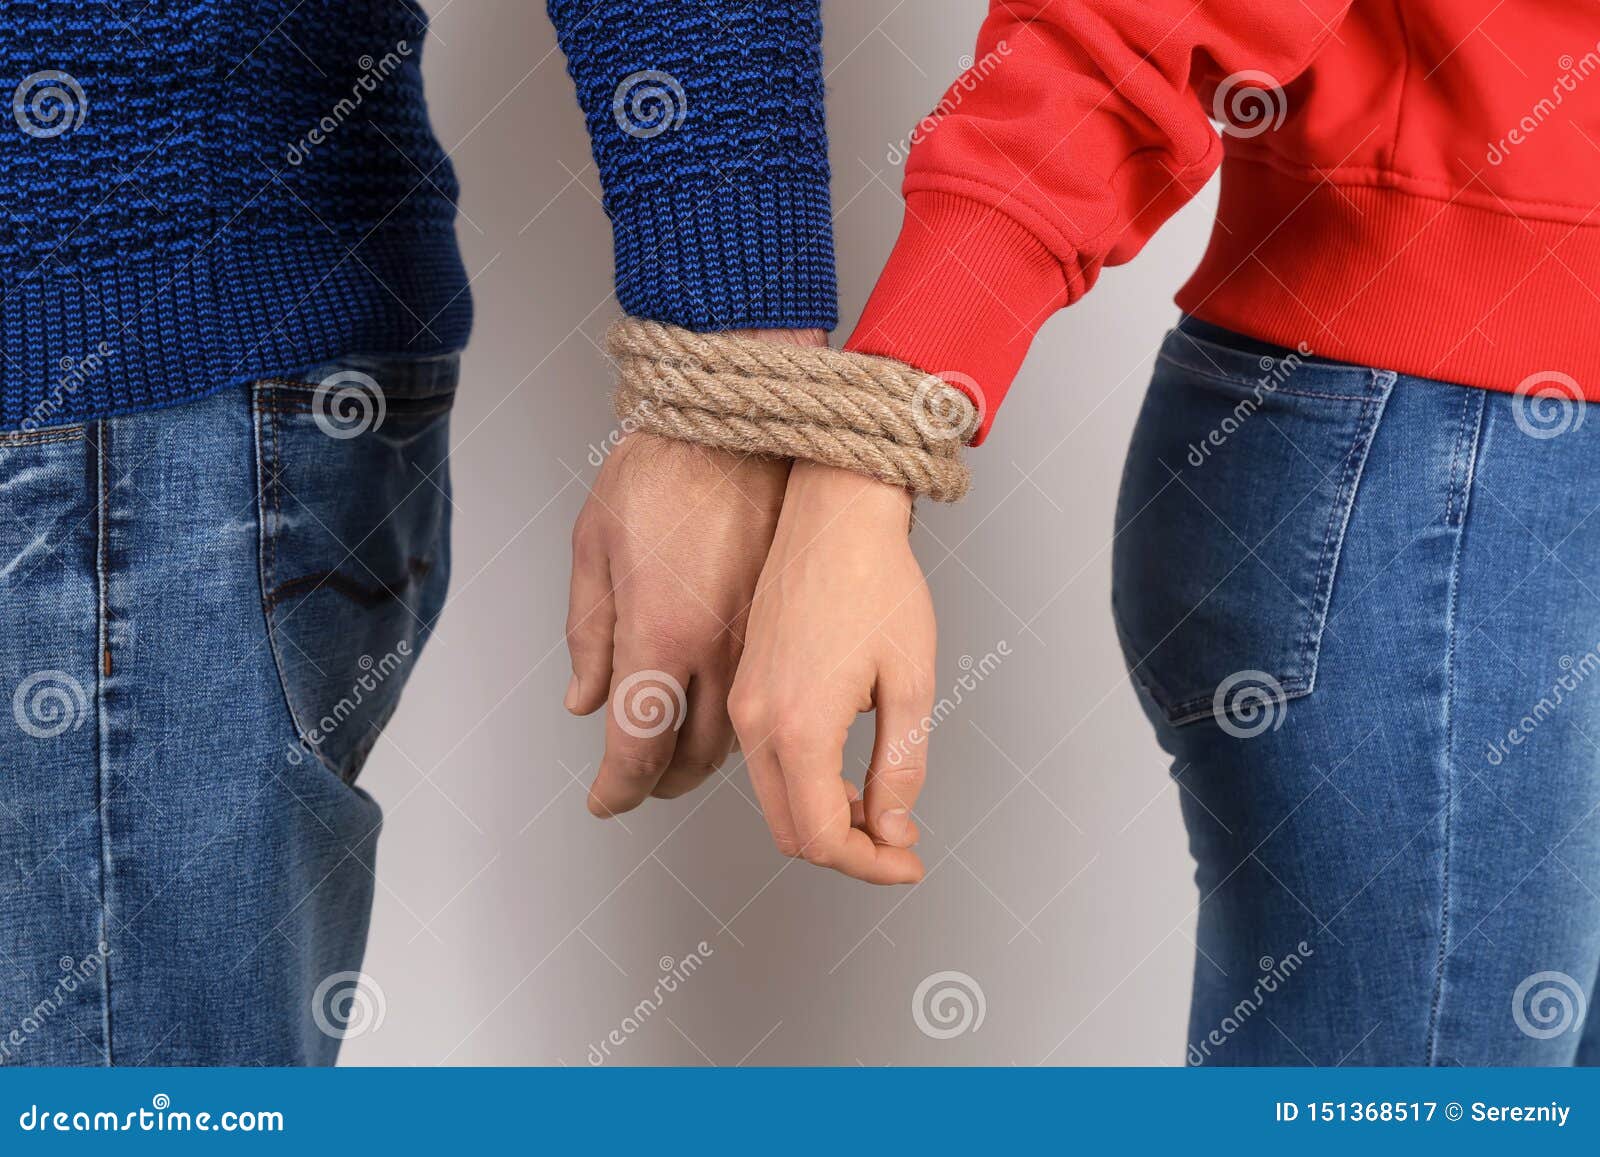 Couple With Tied Together Hands On Light Background Concept Of